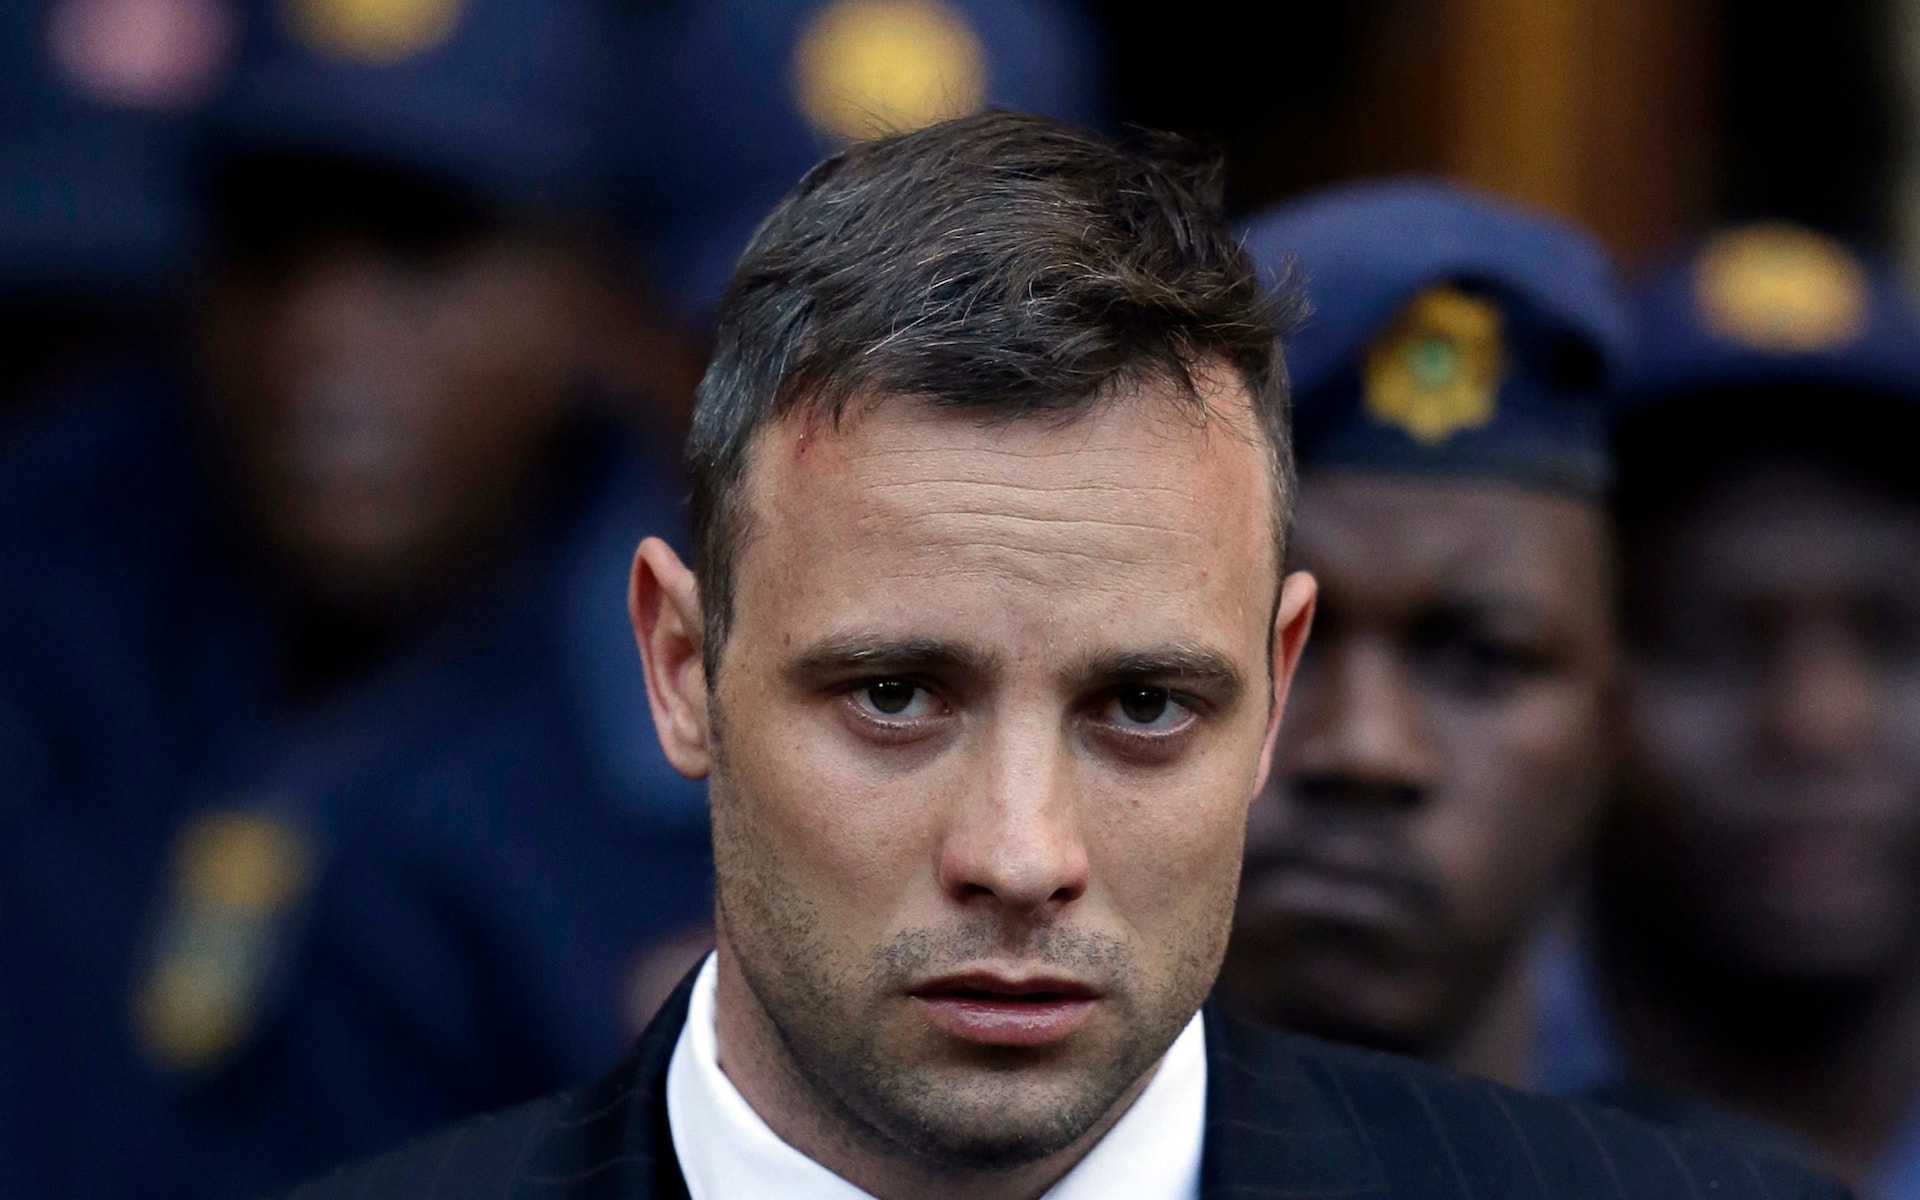 South Africa Supreme Court to Hear Appeal Against Pistorius’ ‘Low’ Murder Sentence